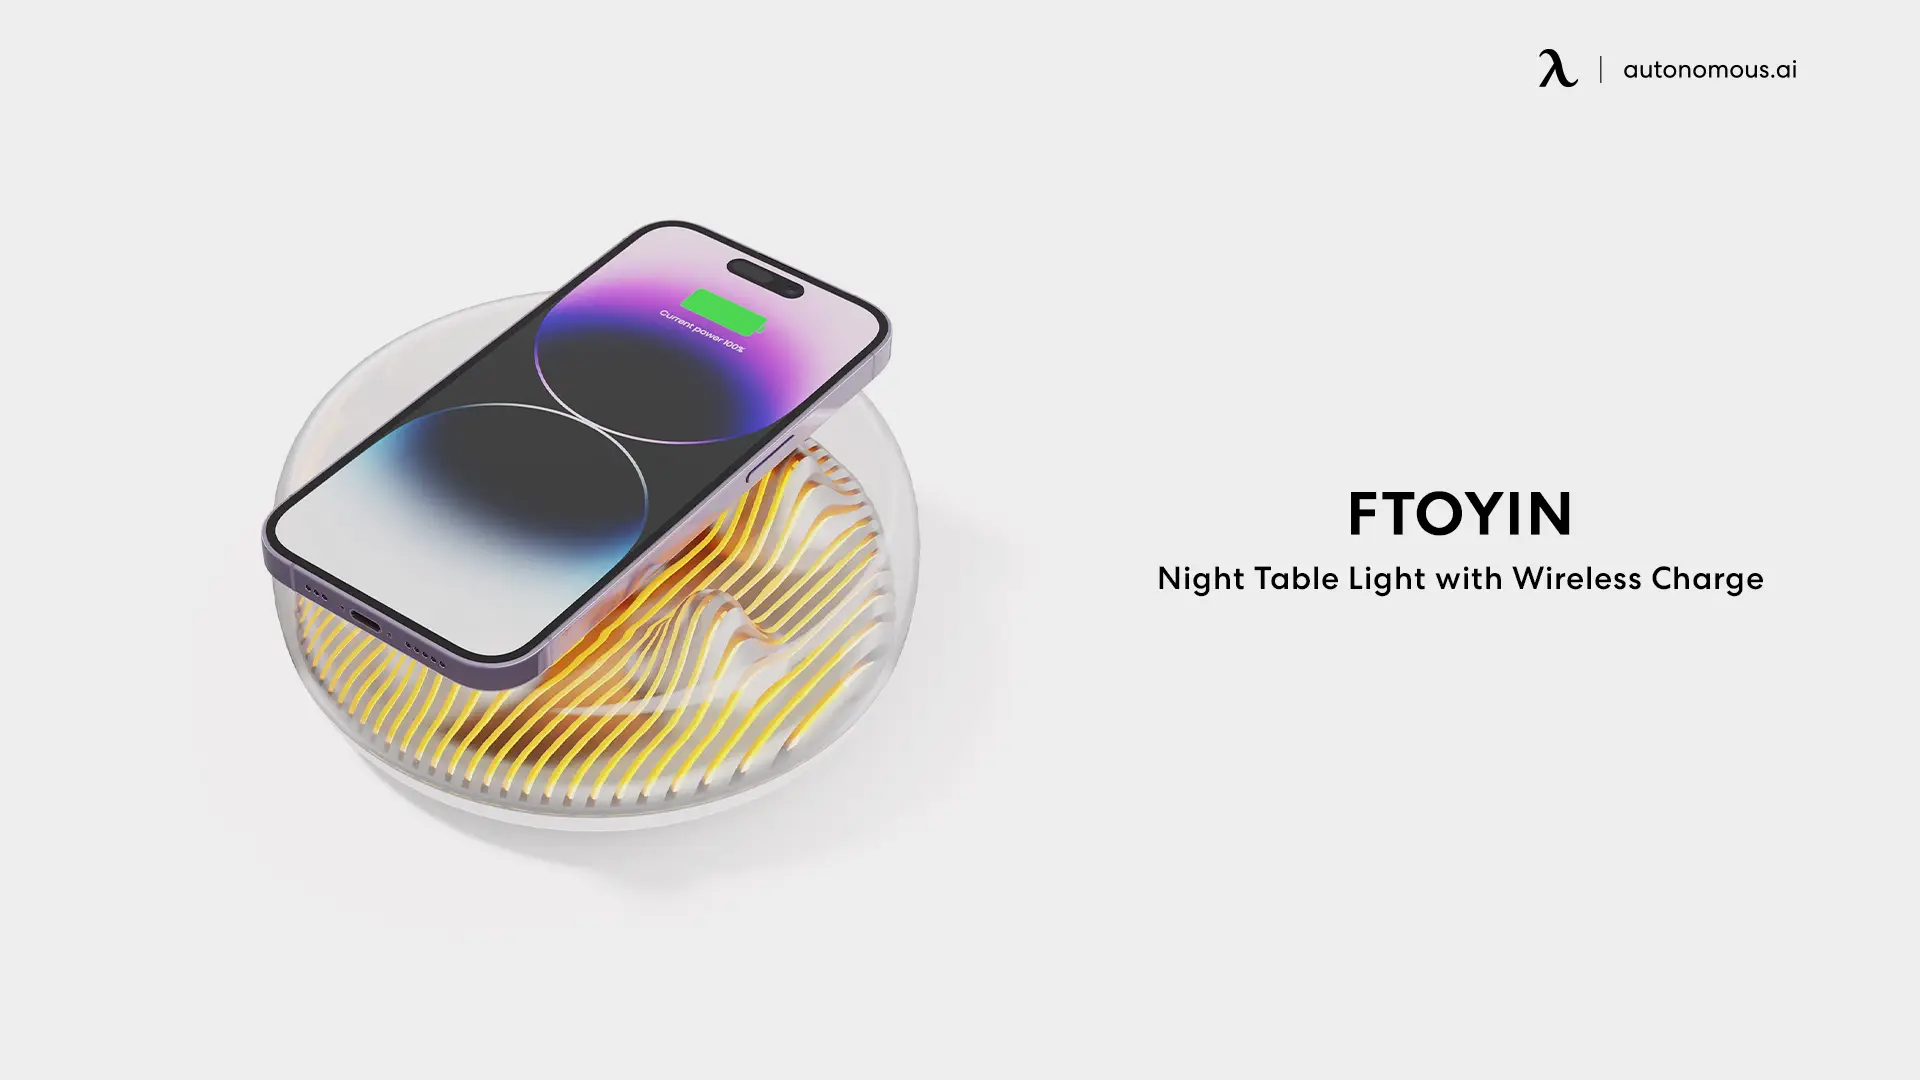 FTOYIN Night Table Light with Wireless Charge